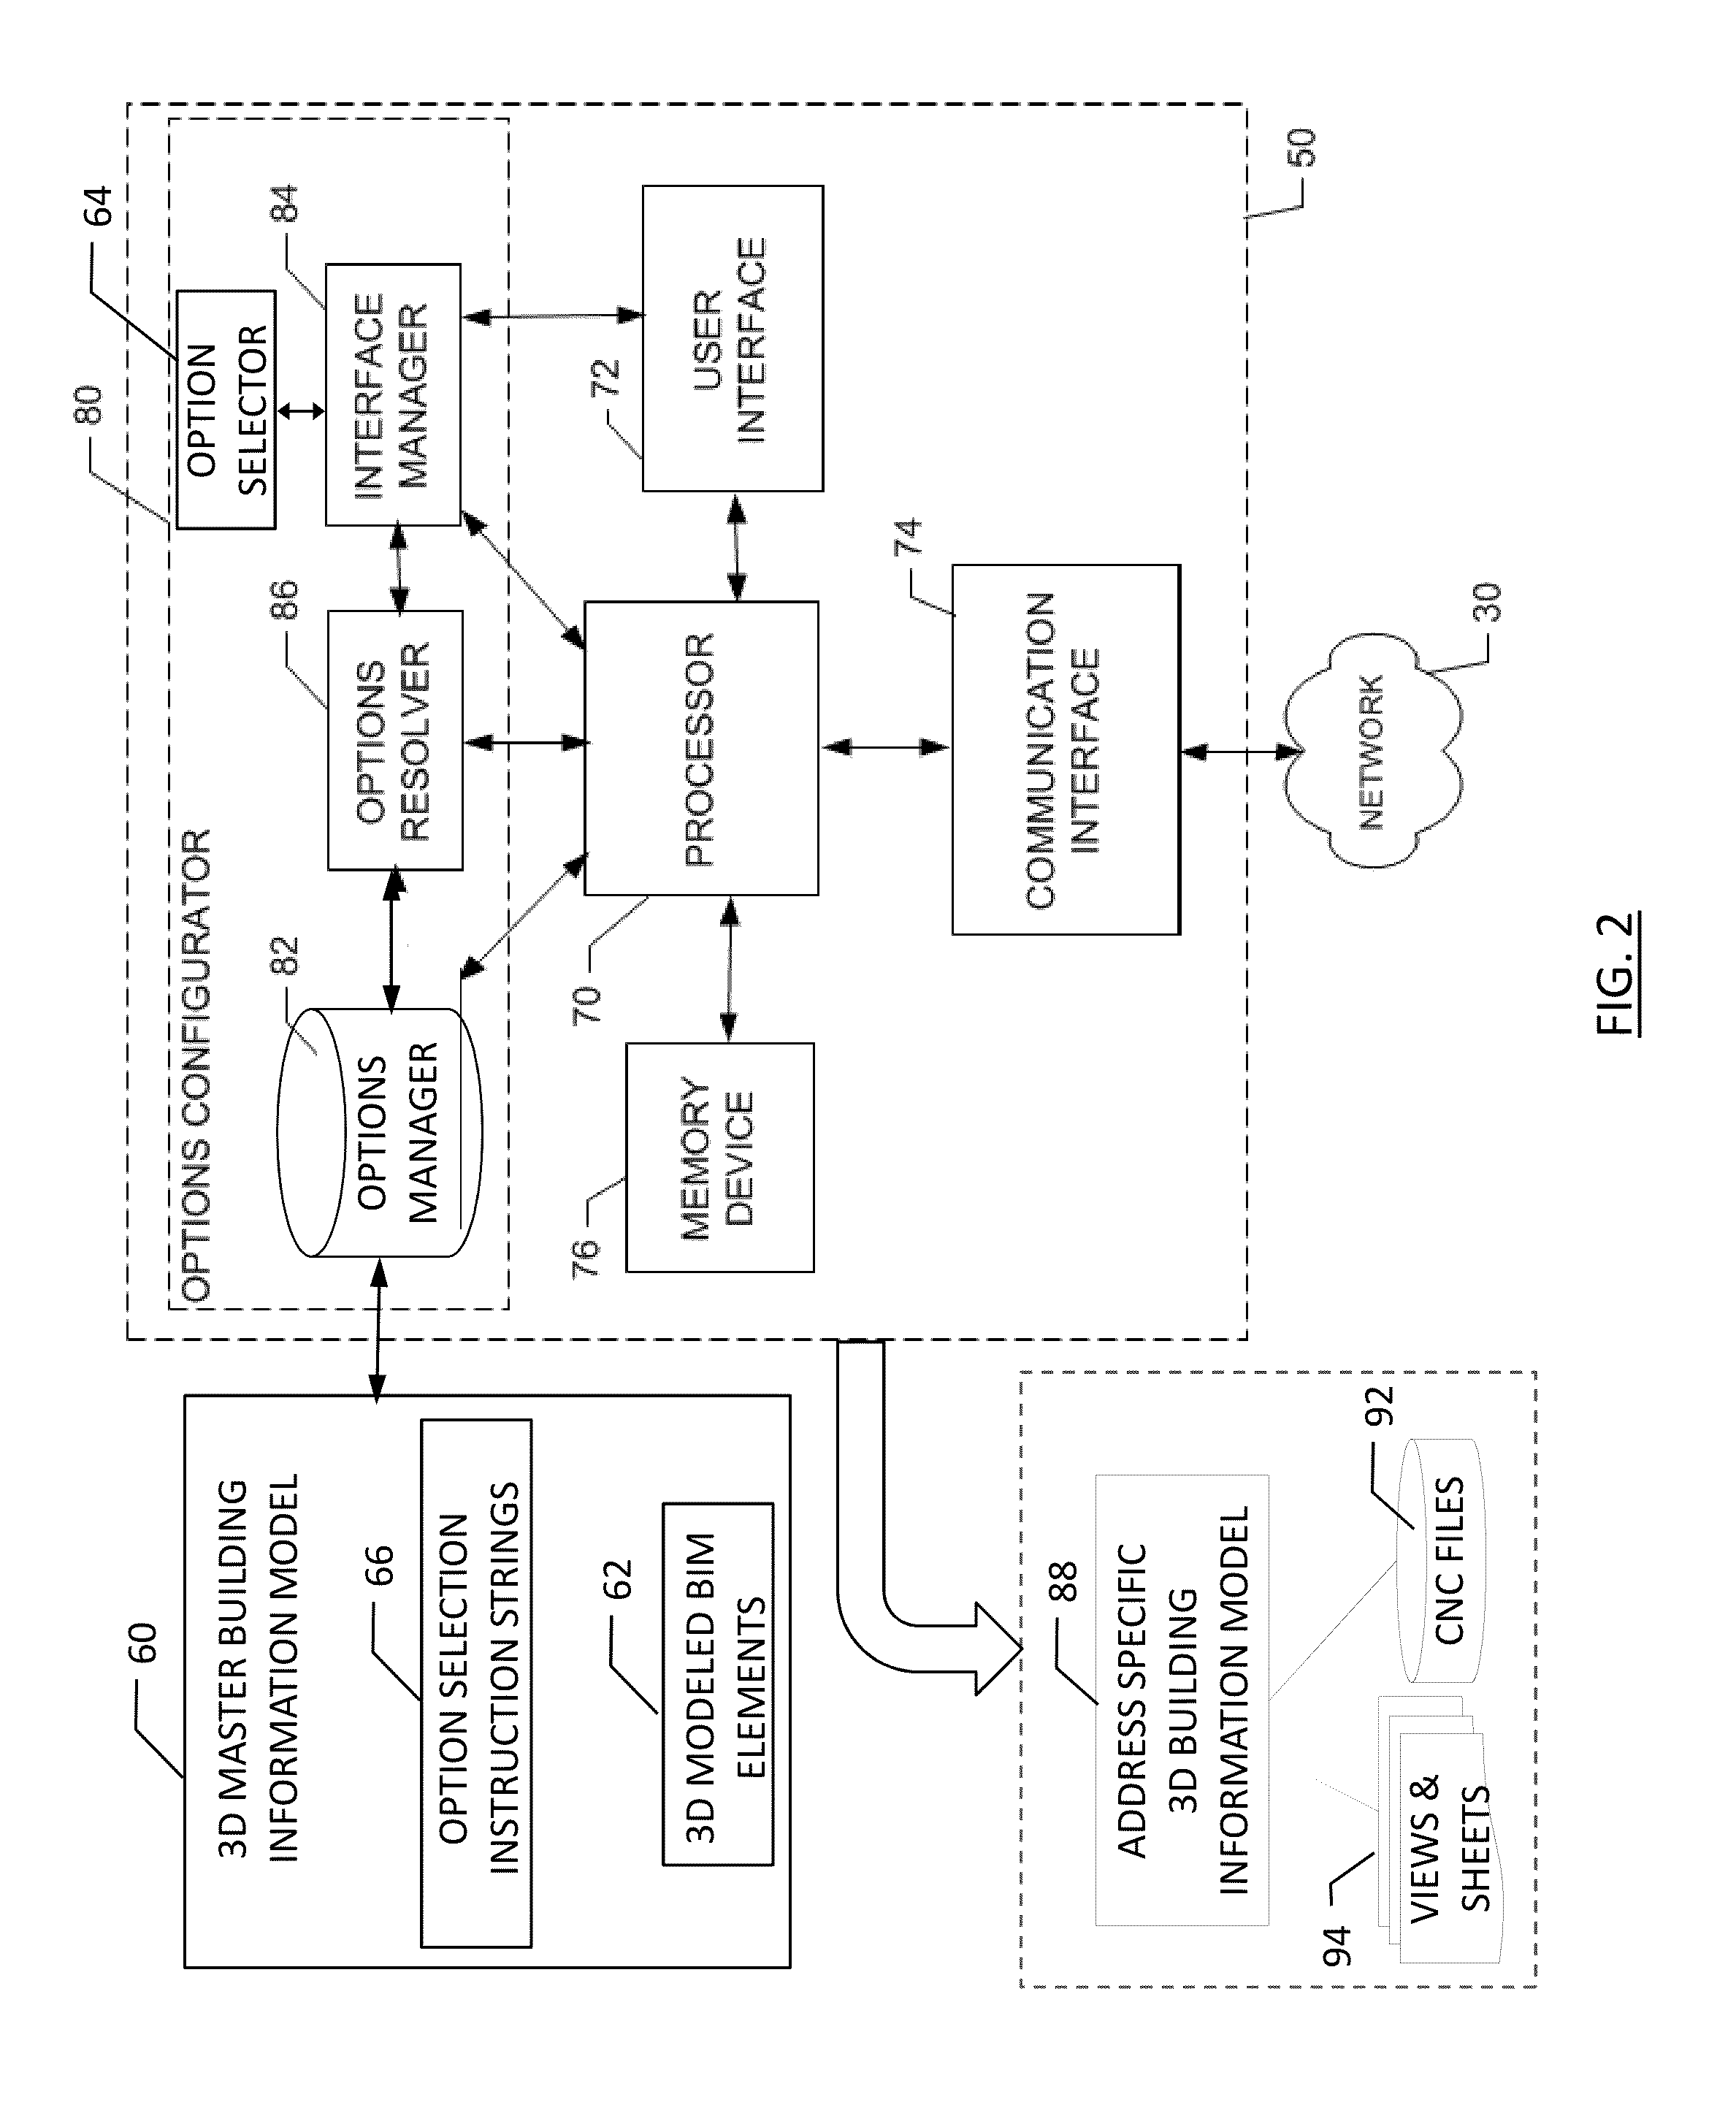 Method, computer program product and apparatus for providing a building options configurator